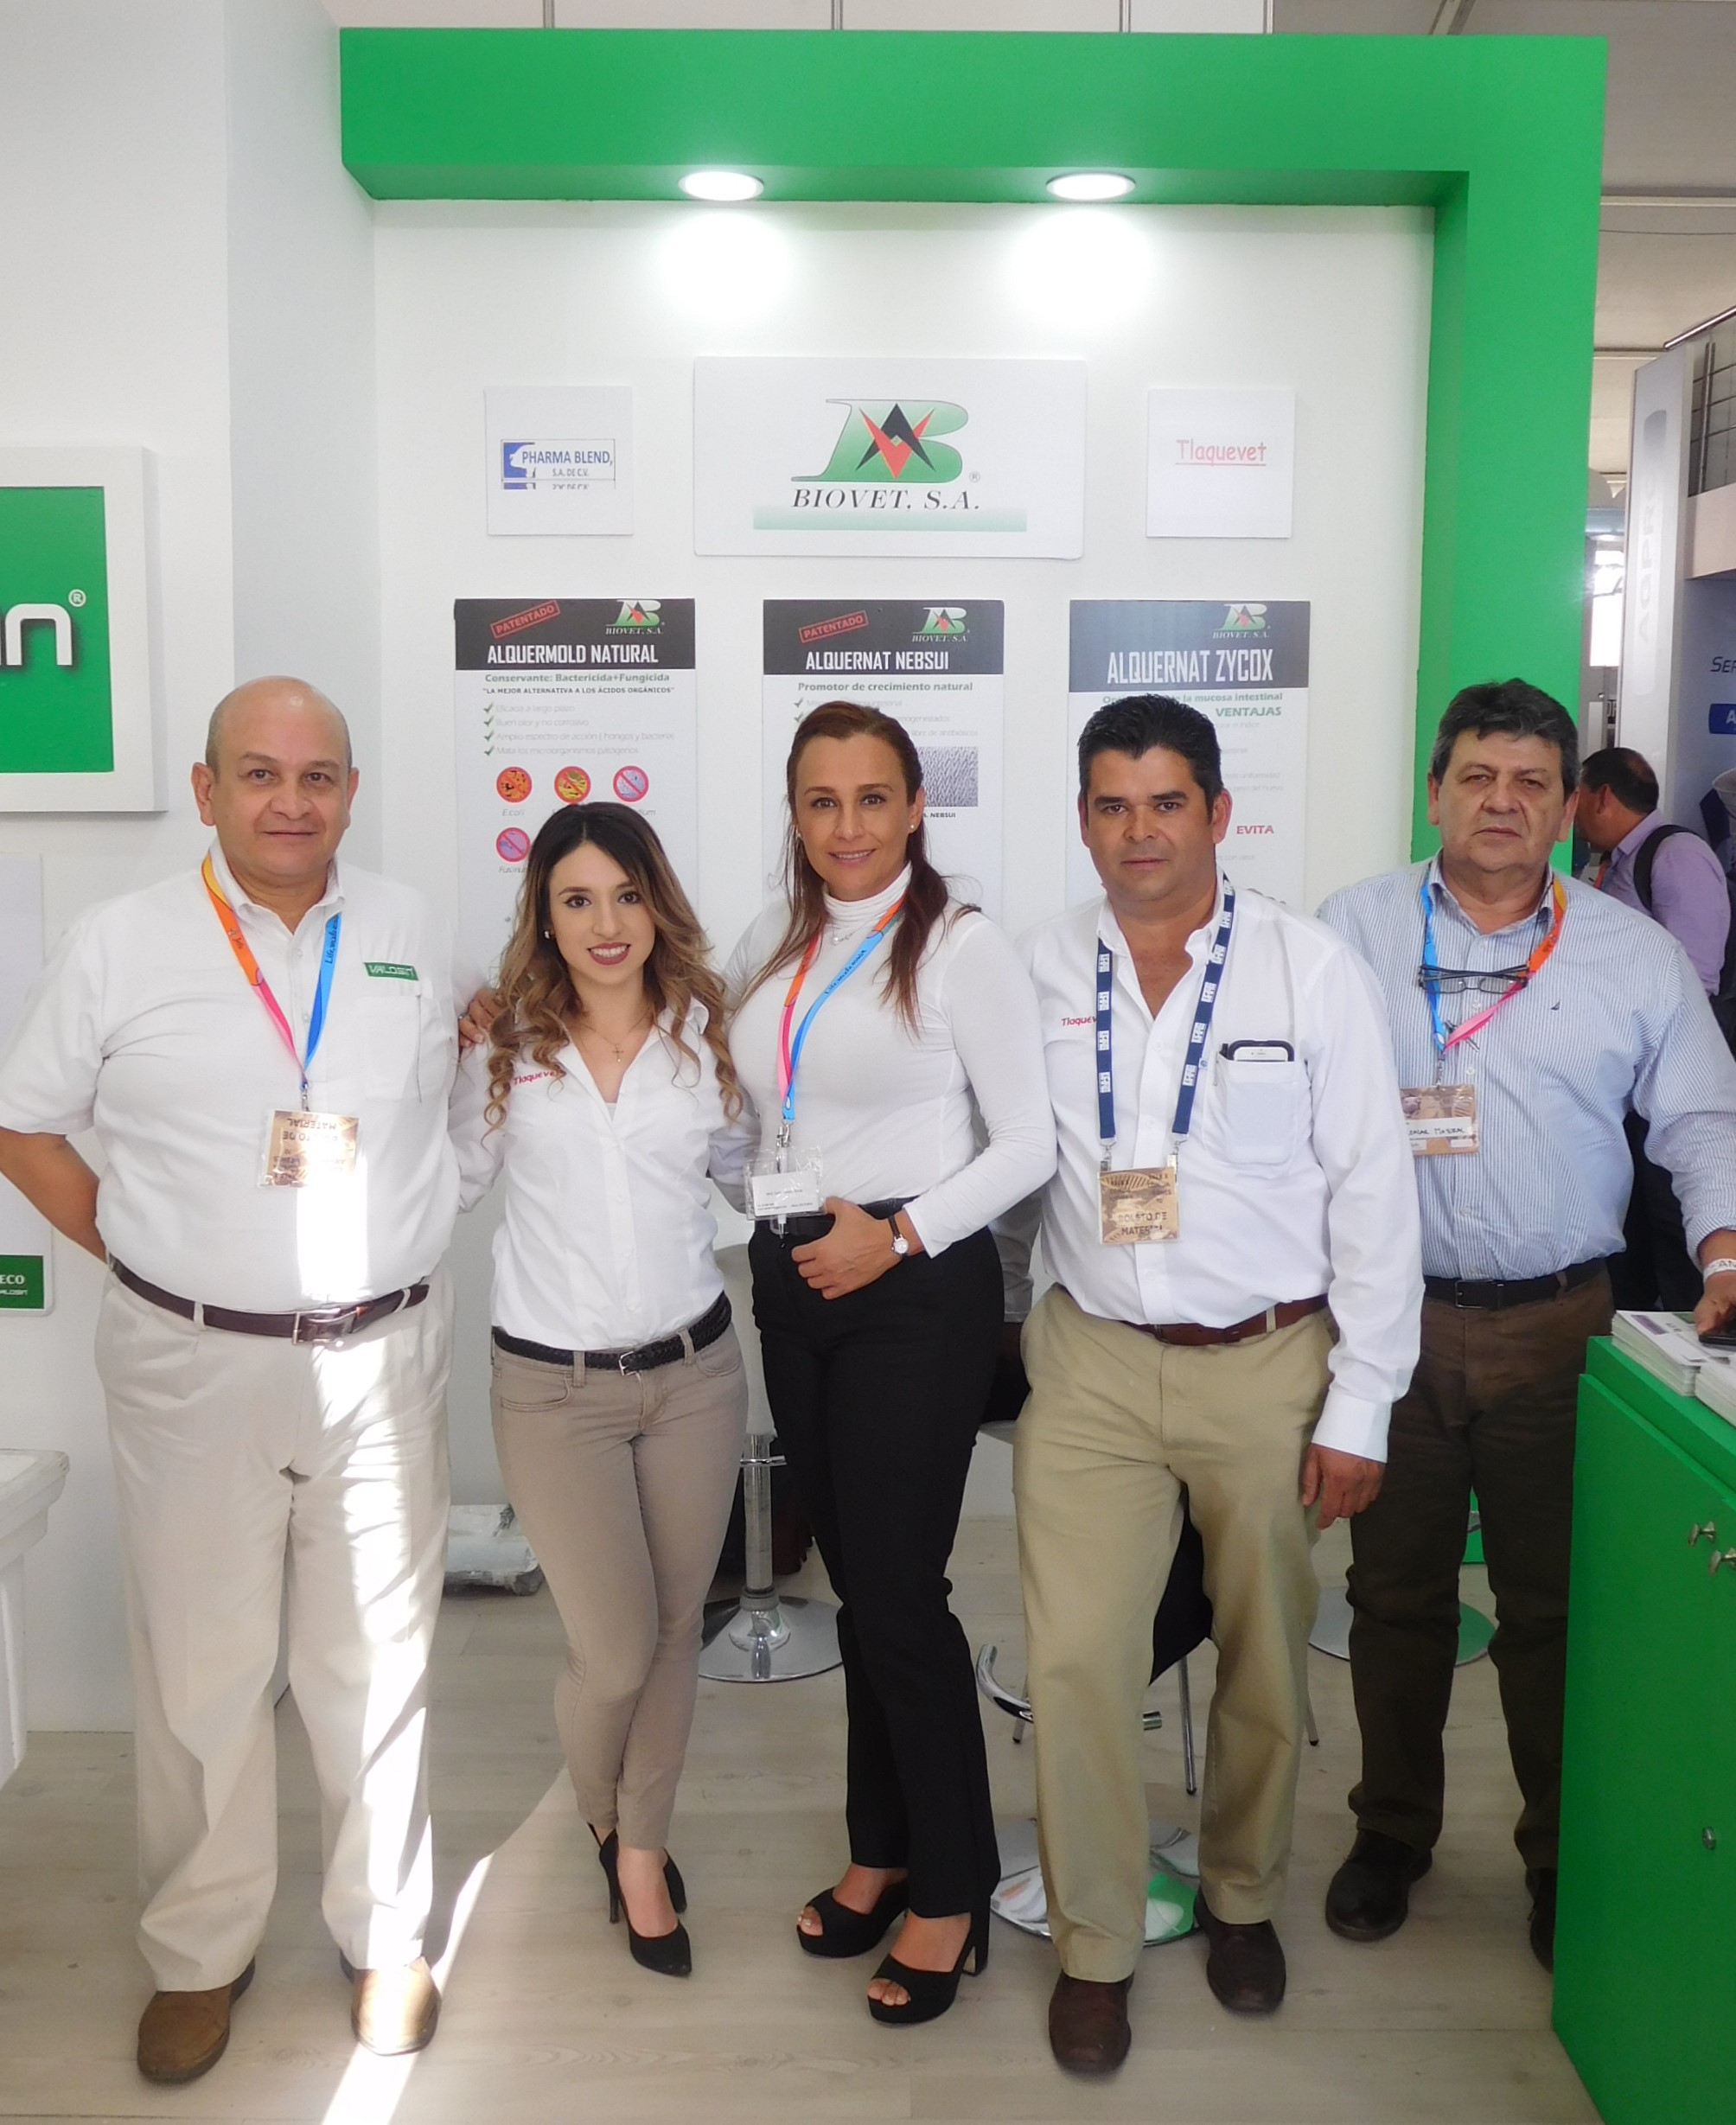 Pharmablend-Biovet participation at the XXIII Annual Congress of AMVECAJ